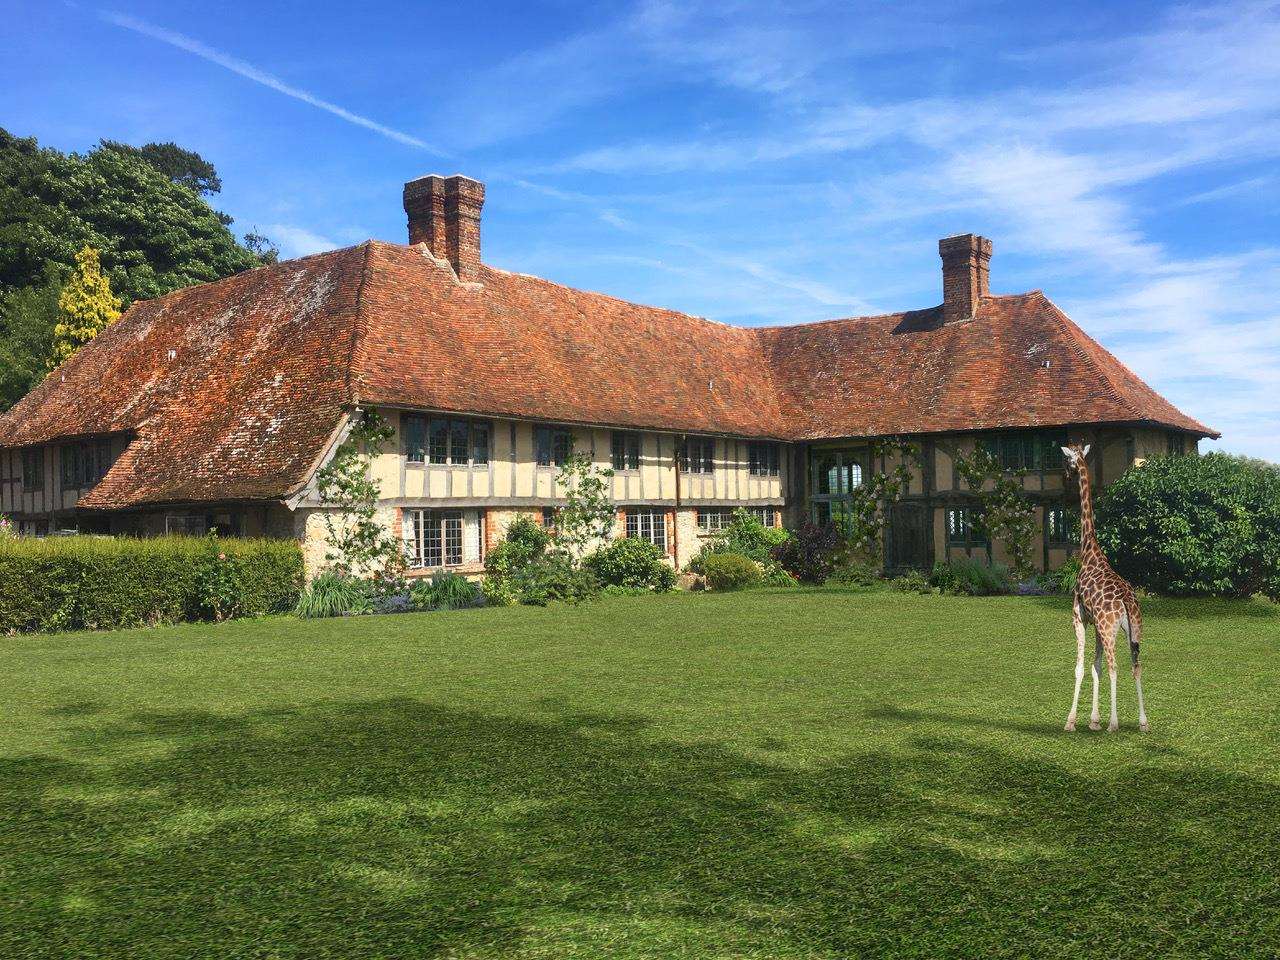 How it would look at Giraffe Manor